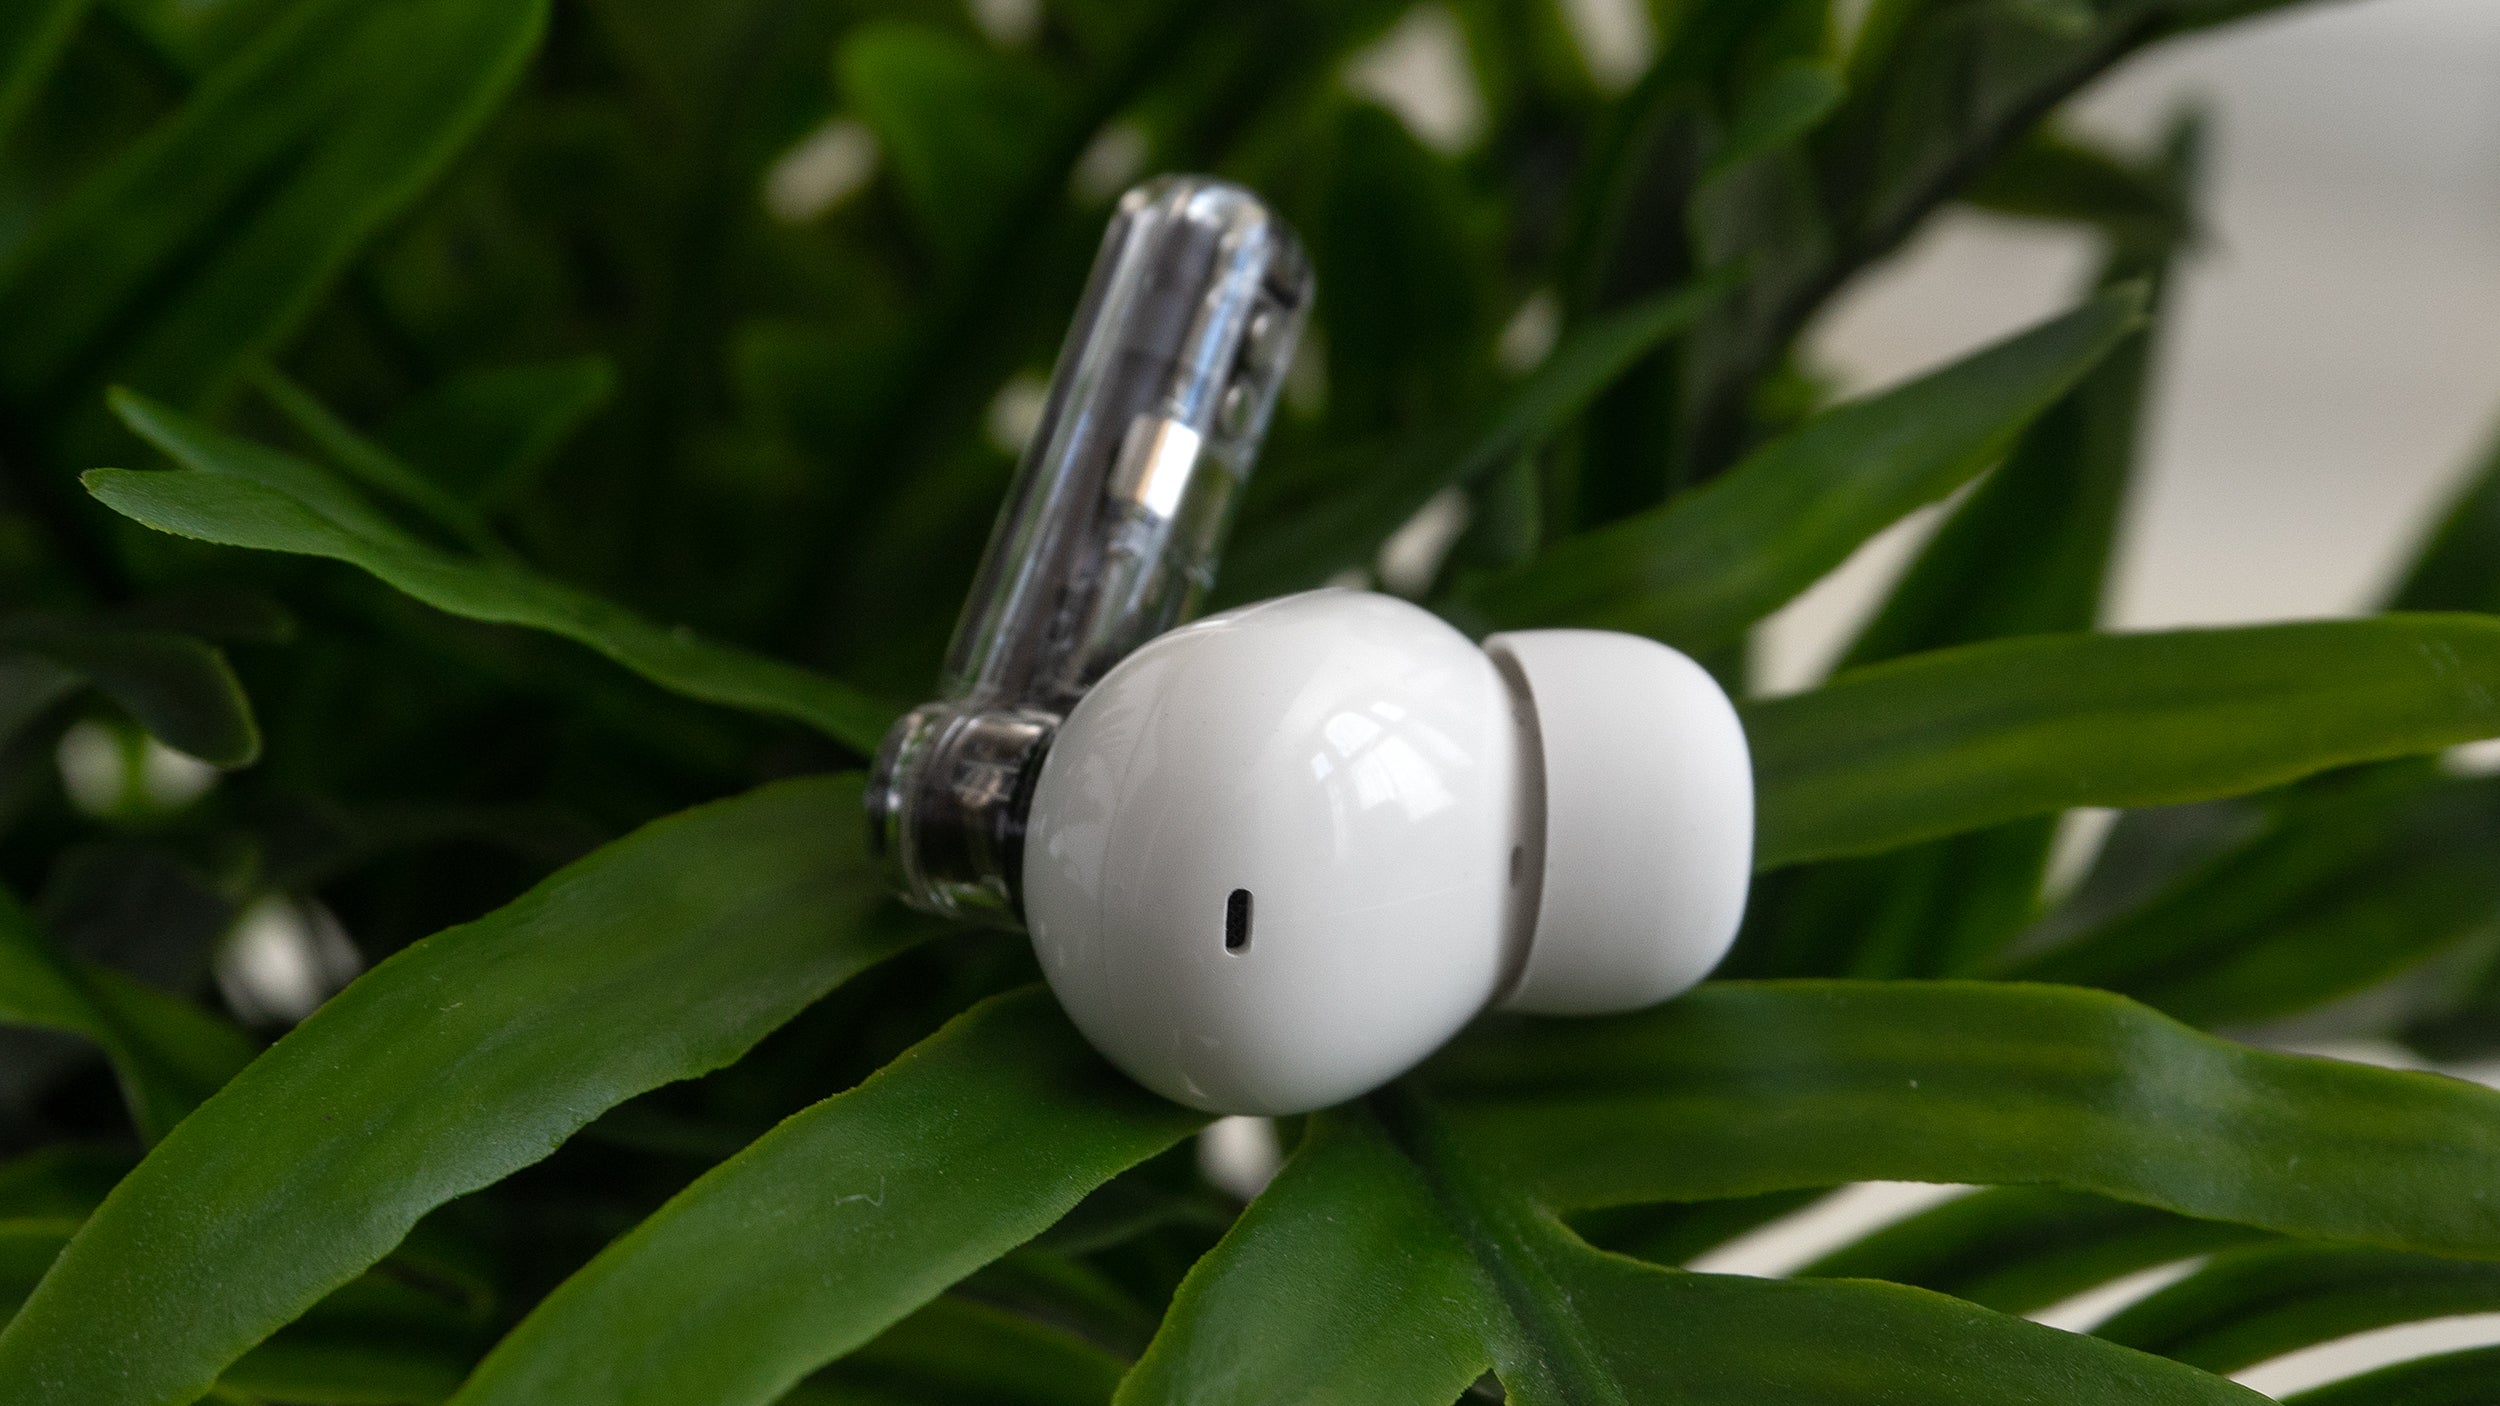 The Nothing Ear (2) earbuds are nearly identical to the Ear (1)'s, aside from a different label, and the location of one of the microphones. (Photo: Andrew Liszewski | Gizmodo)